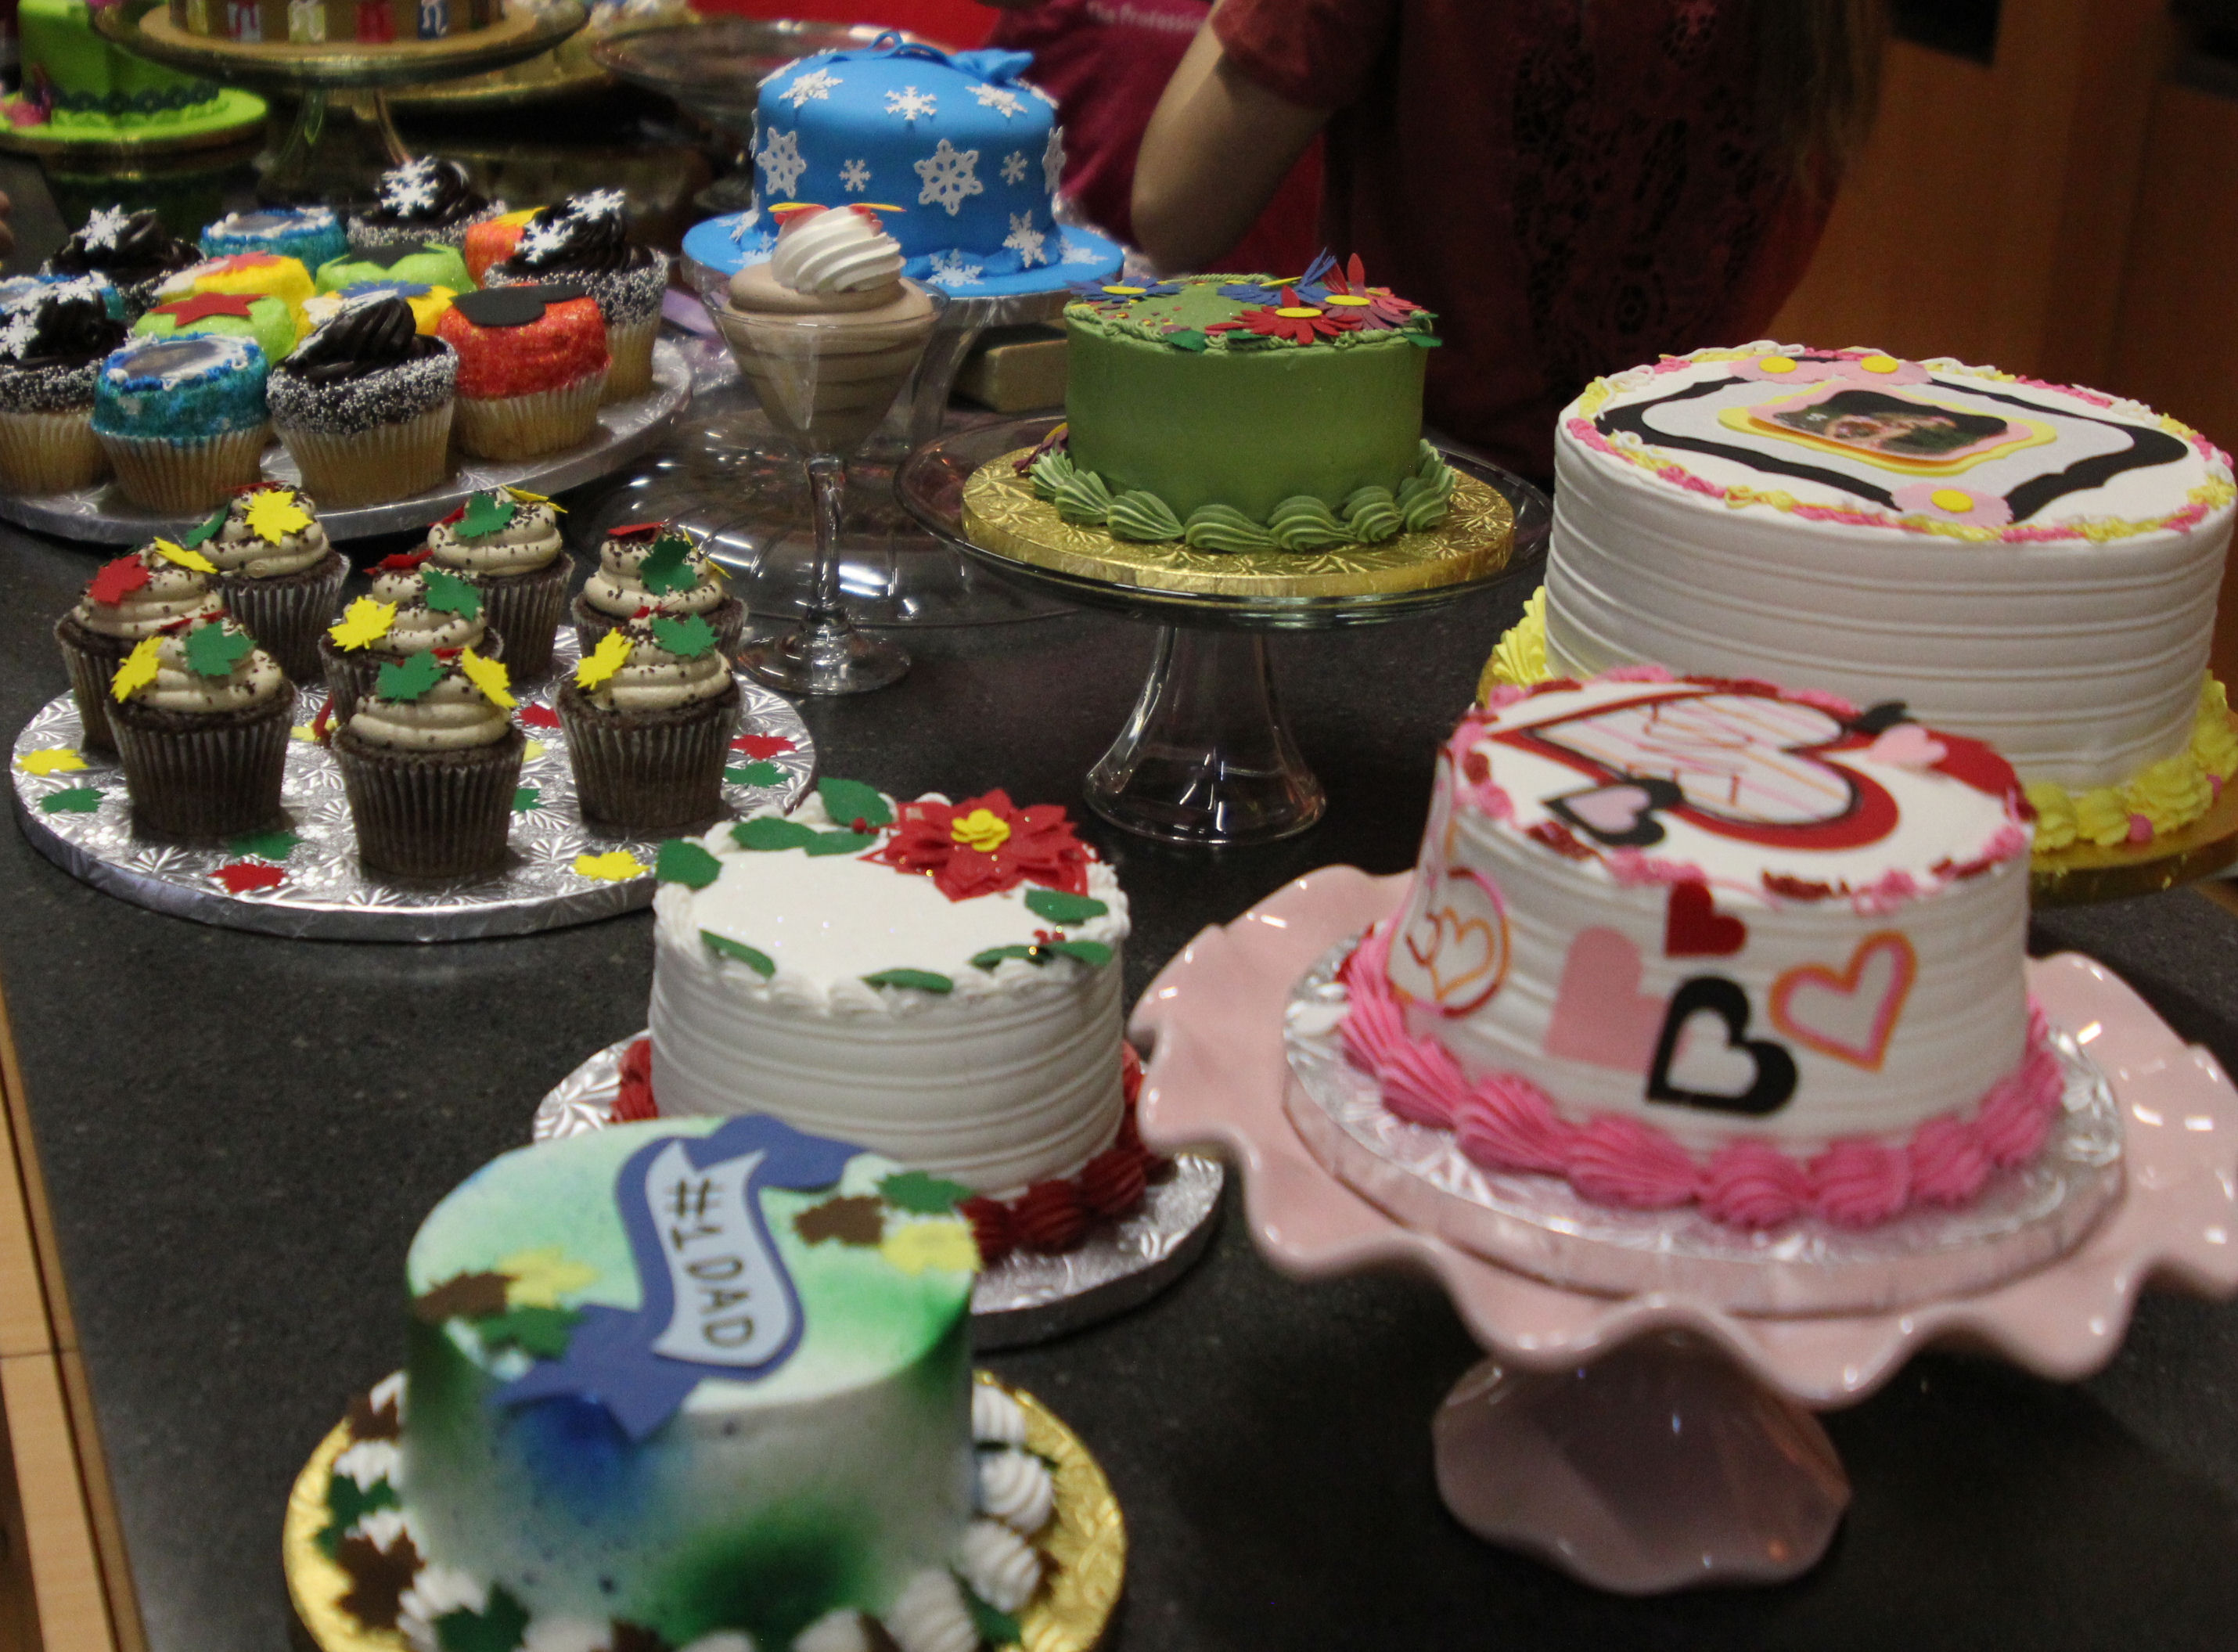 Icing Images' New Products Make Professional Cake Decorating Easy For